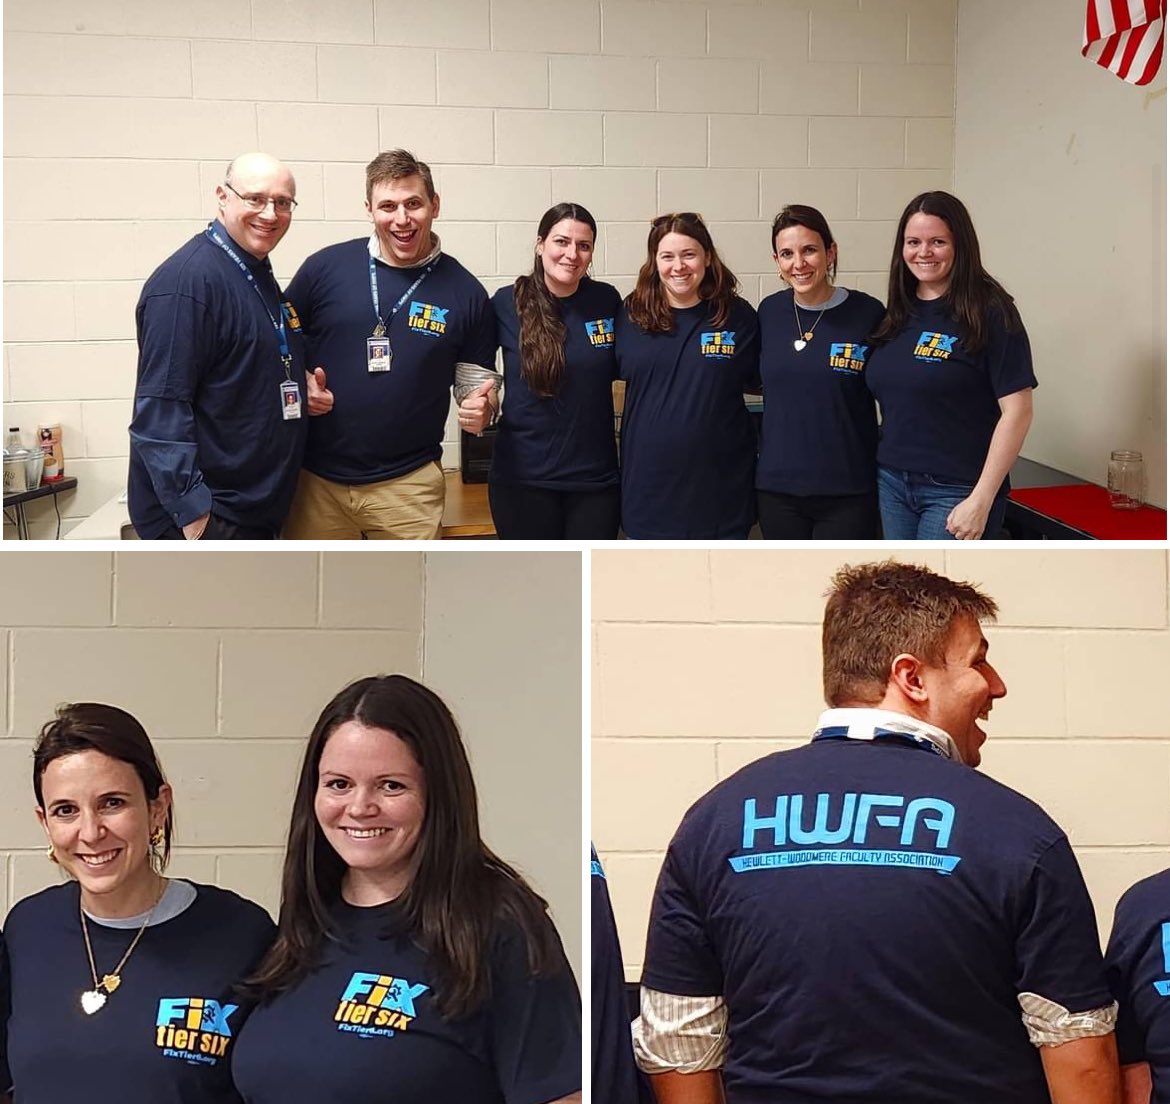 Coming soon to a classroom near you! HWFA’s Tier 4, 5, and 6 members working to #FixTier6